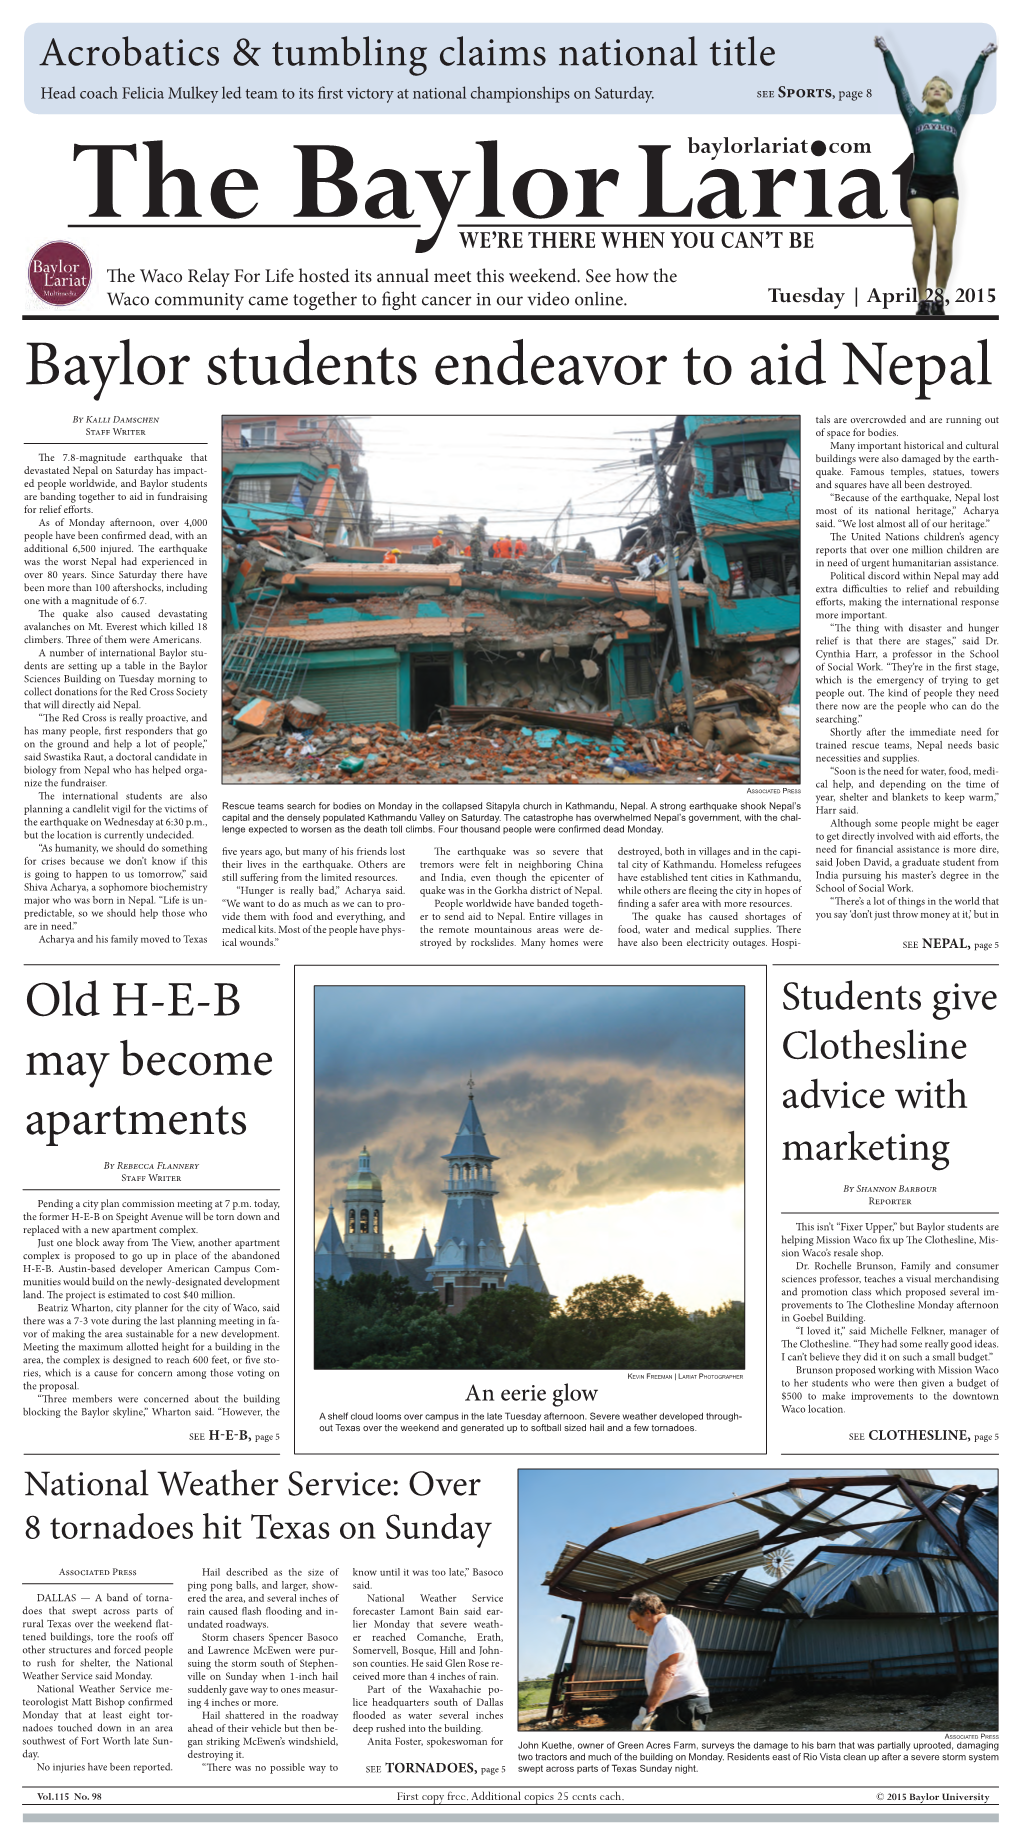 Baylor Students Endeavor to Aid Nepal by Kalli Damschen Tals Are Overcrowded and Are Running out Staff Writer of Space for Bodies